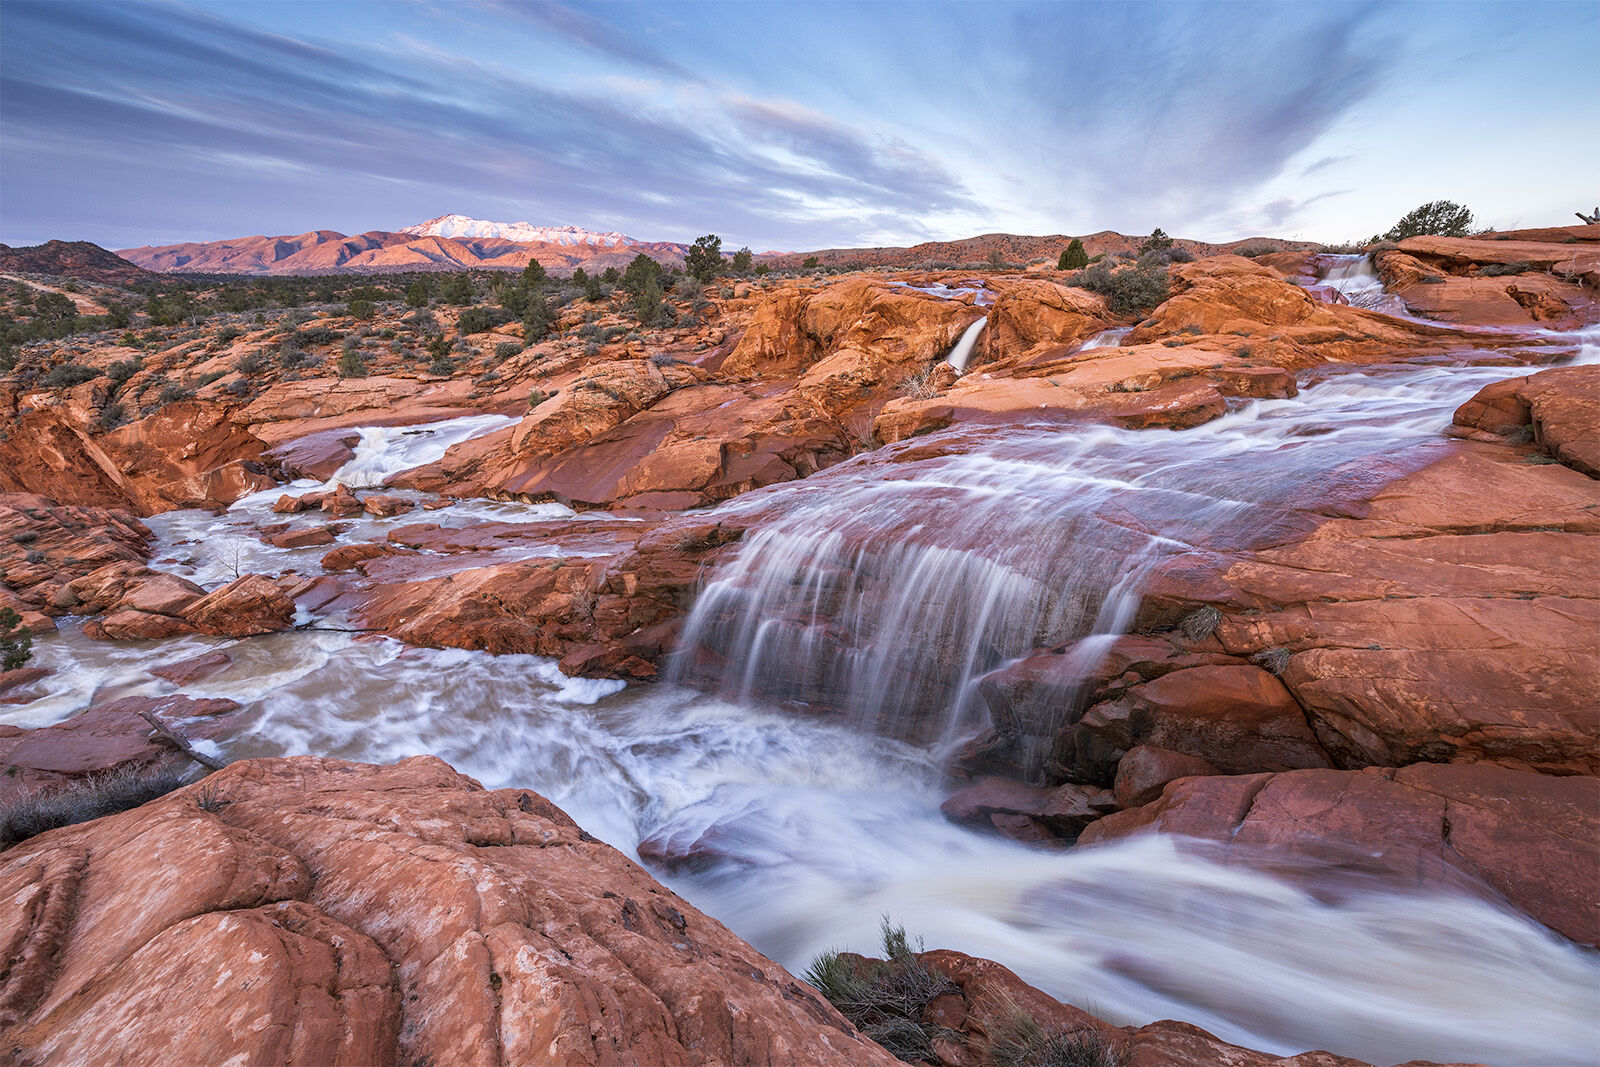 Waterfalls cascading over red rock at sunrise with a distant snow capped mountain in the distance. 